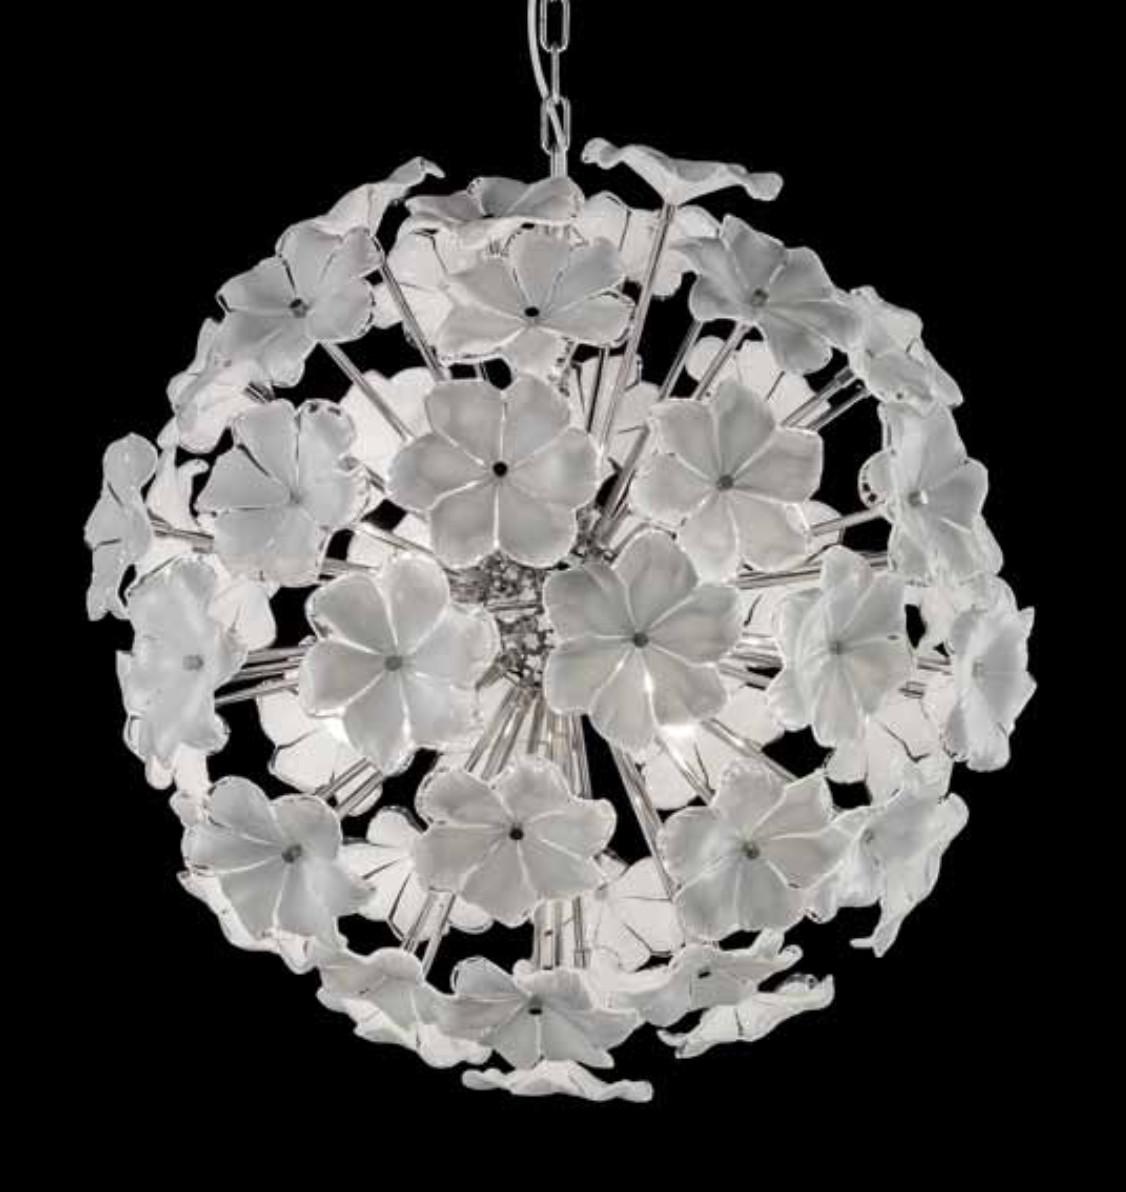 Italian sputnik chandelier with hand blown white Murano lotus flowers mounted chrome finish frame / Made in Italy in the style of Cenedese
Measures: diameter 27.5 inches, height 27.5 inches plus chain and canopy
6 lights / E12 or E14 type / max 40W